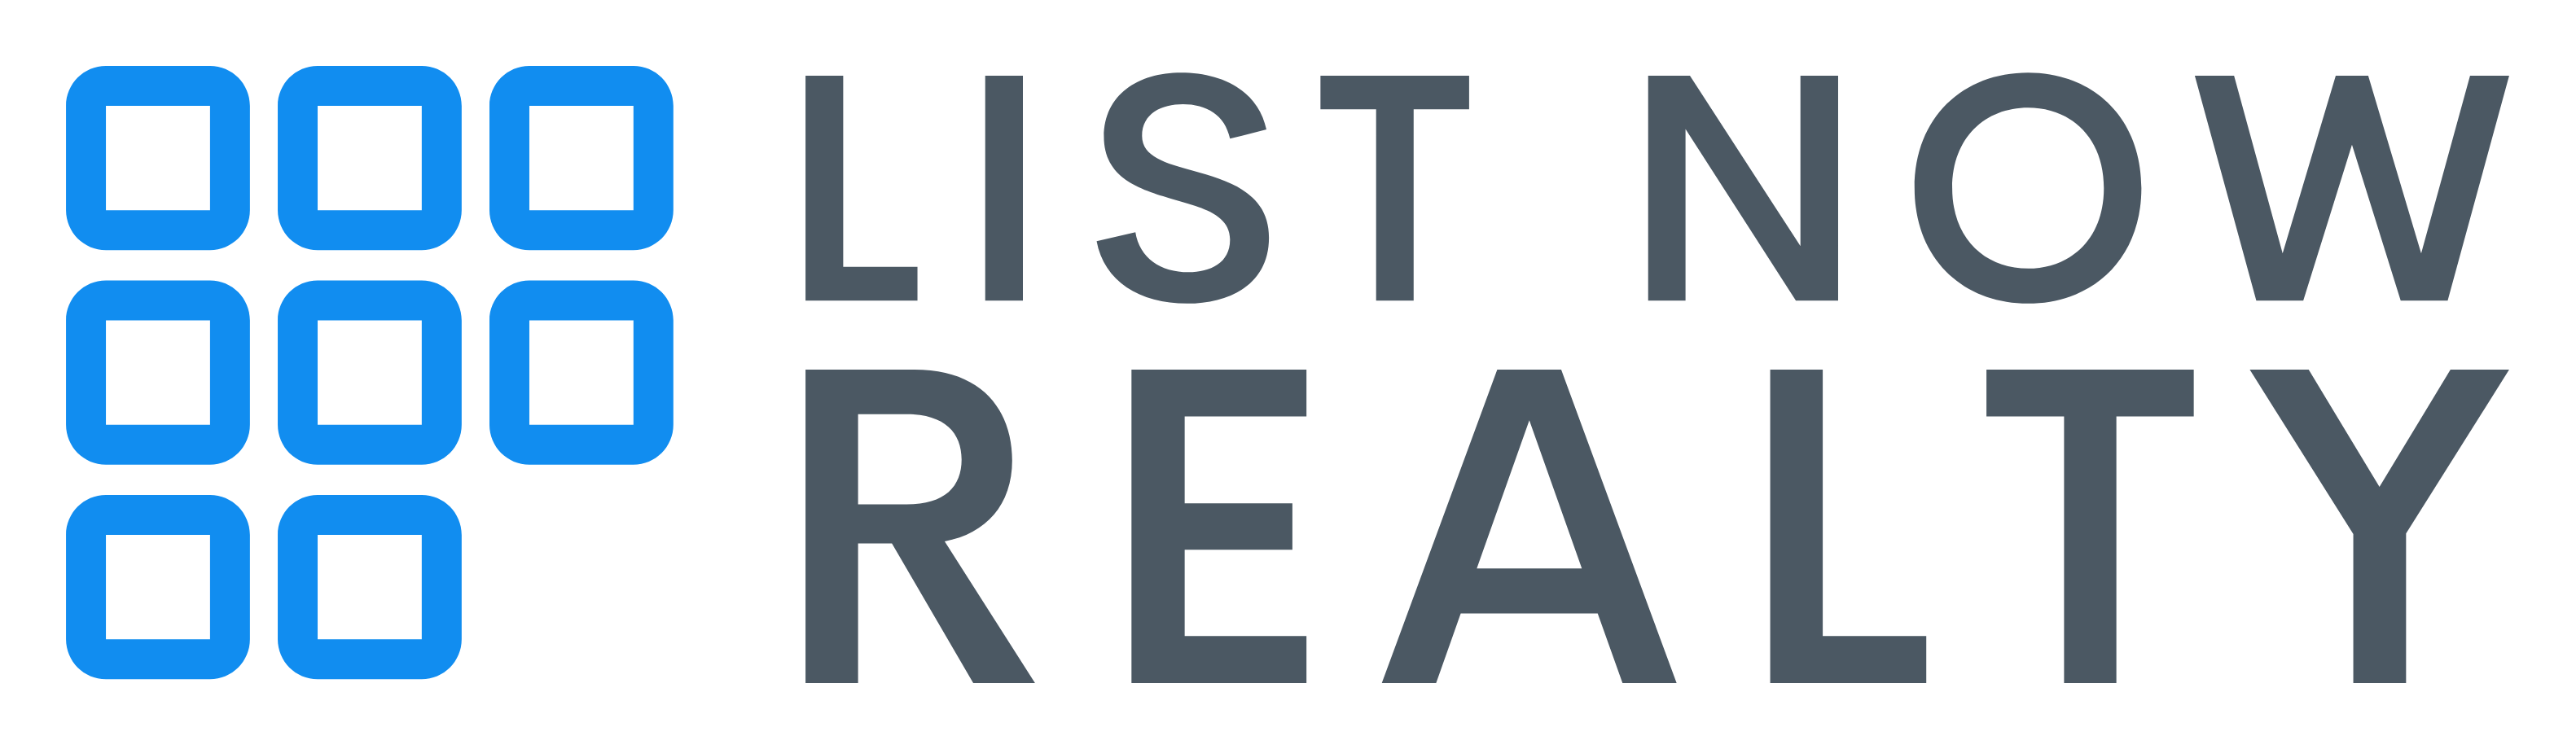 List Now Realty  logo